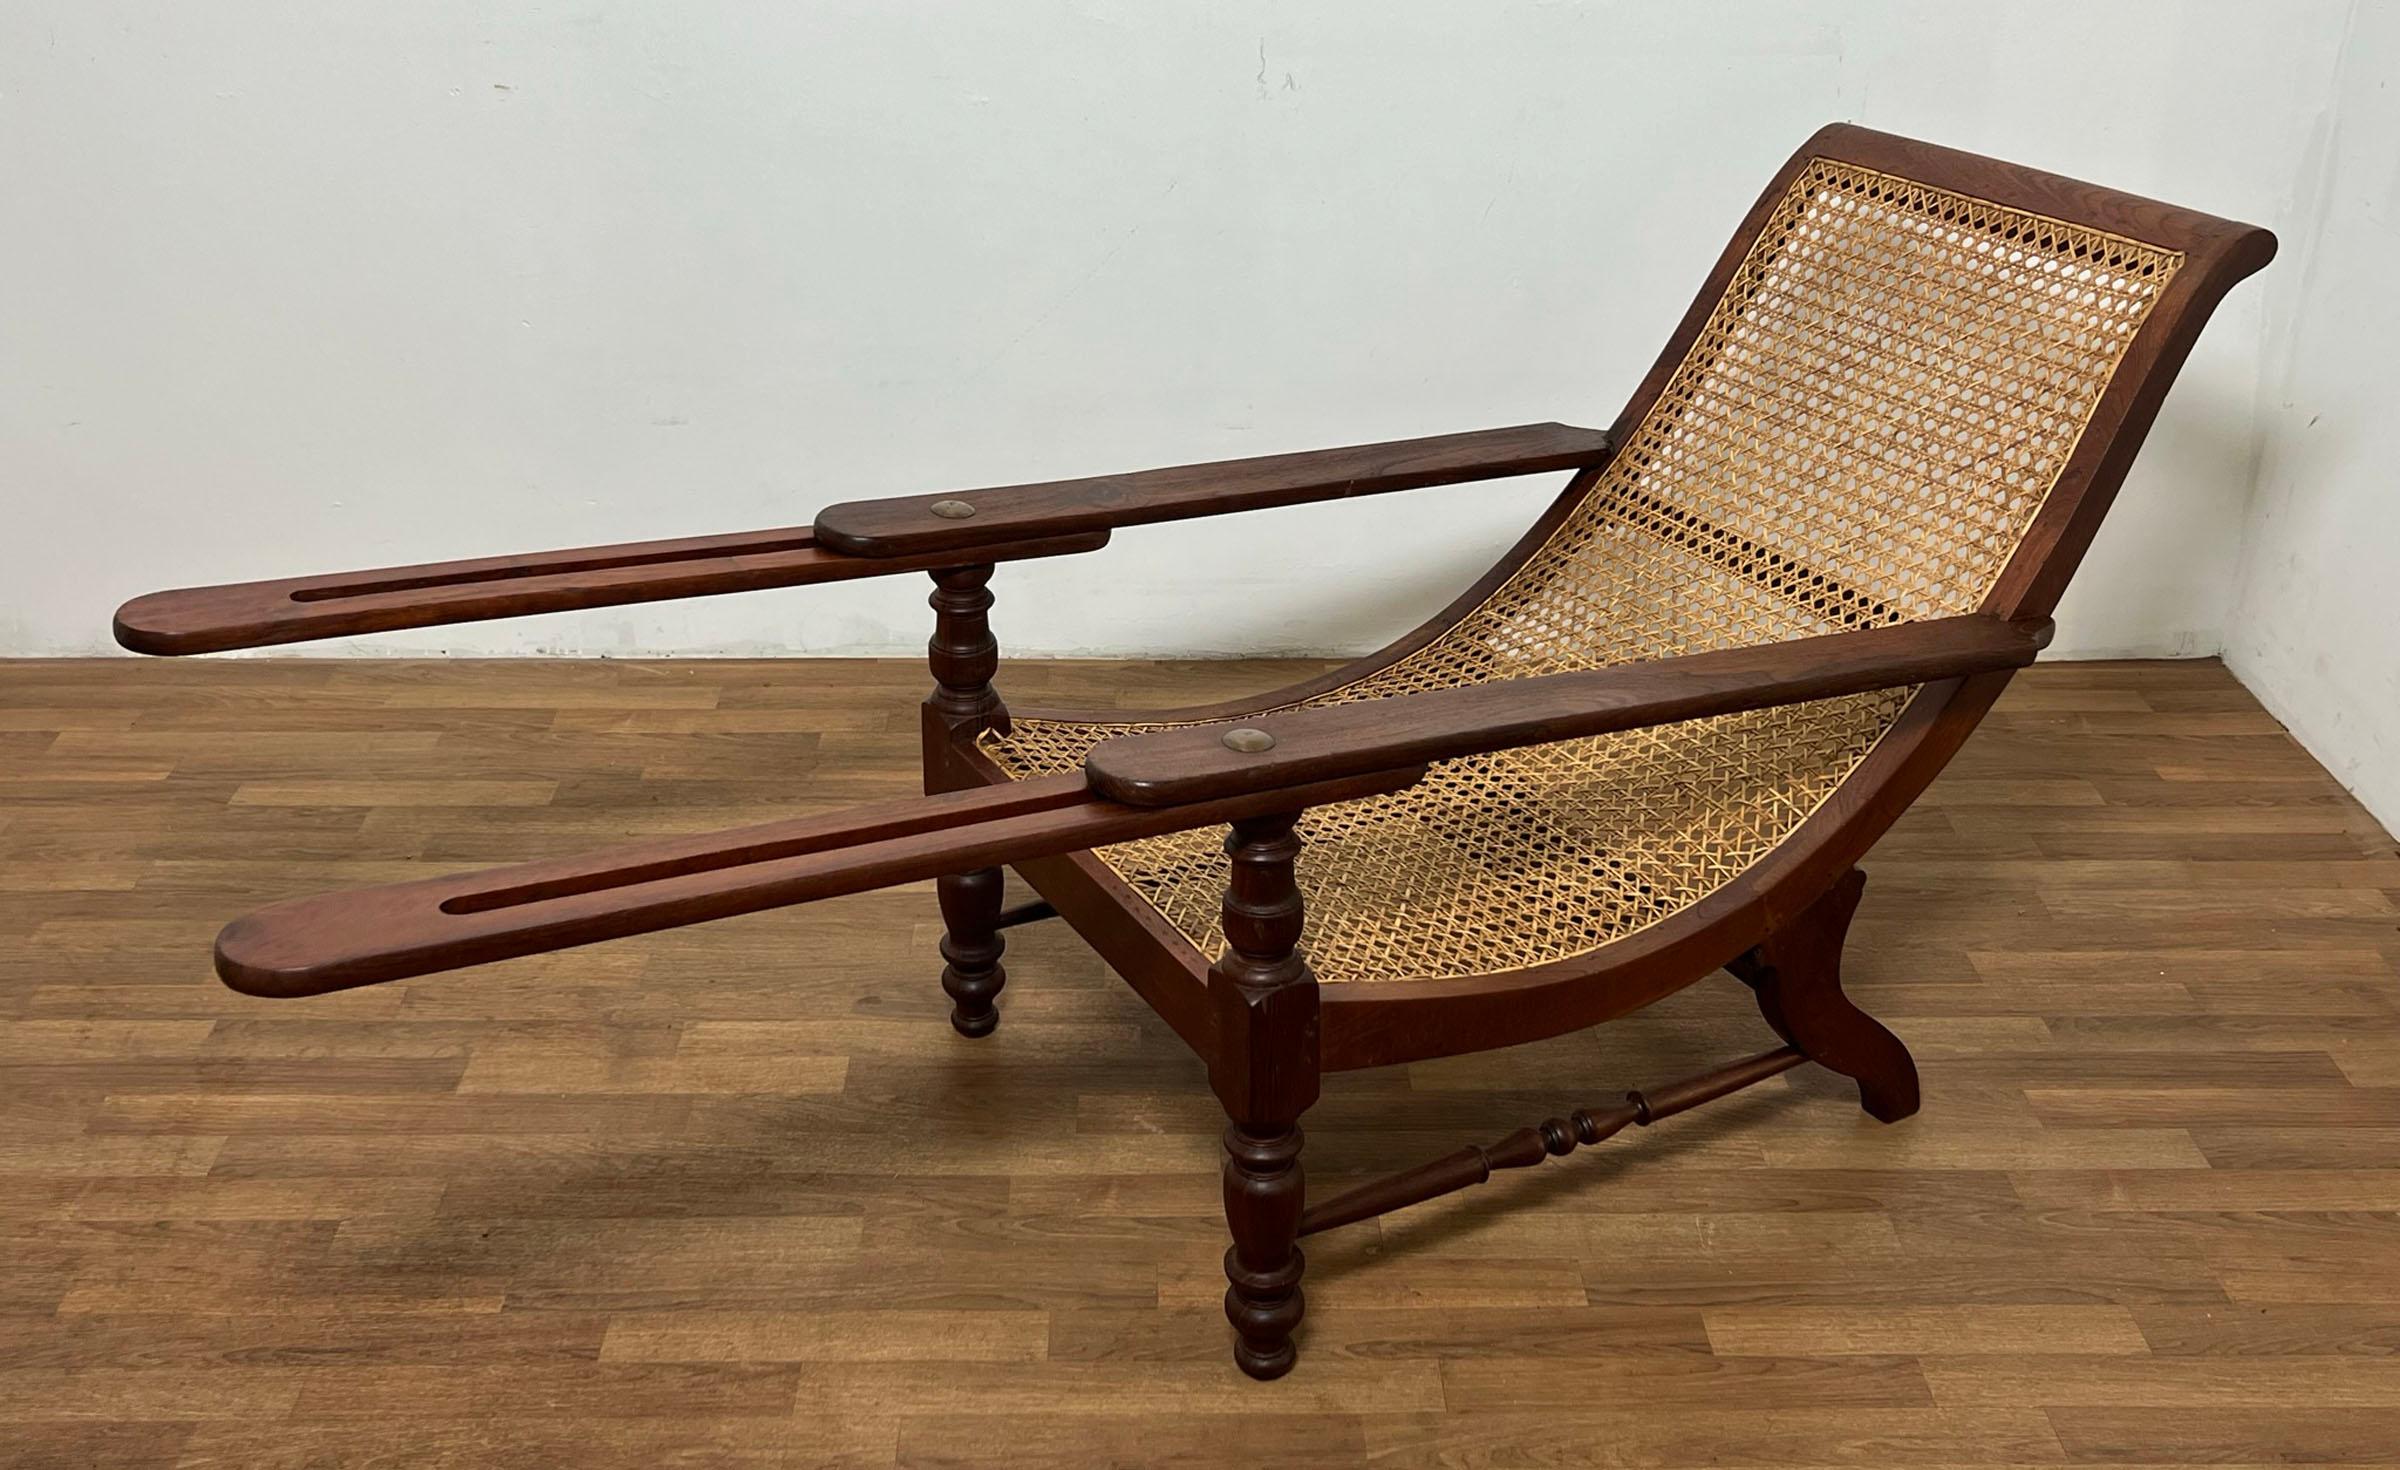 An original antique Anglo-Indian long paddle arm plantation lounge chair in solid teak circa late 19th century. Retains its underarm 
extensions for reclining with legs up.  

Depth is 51.5